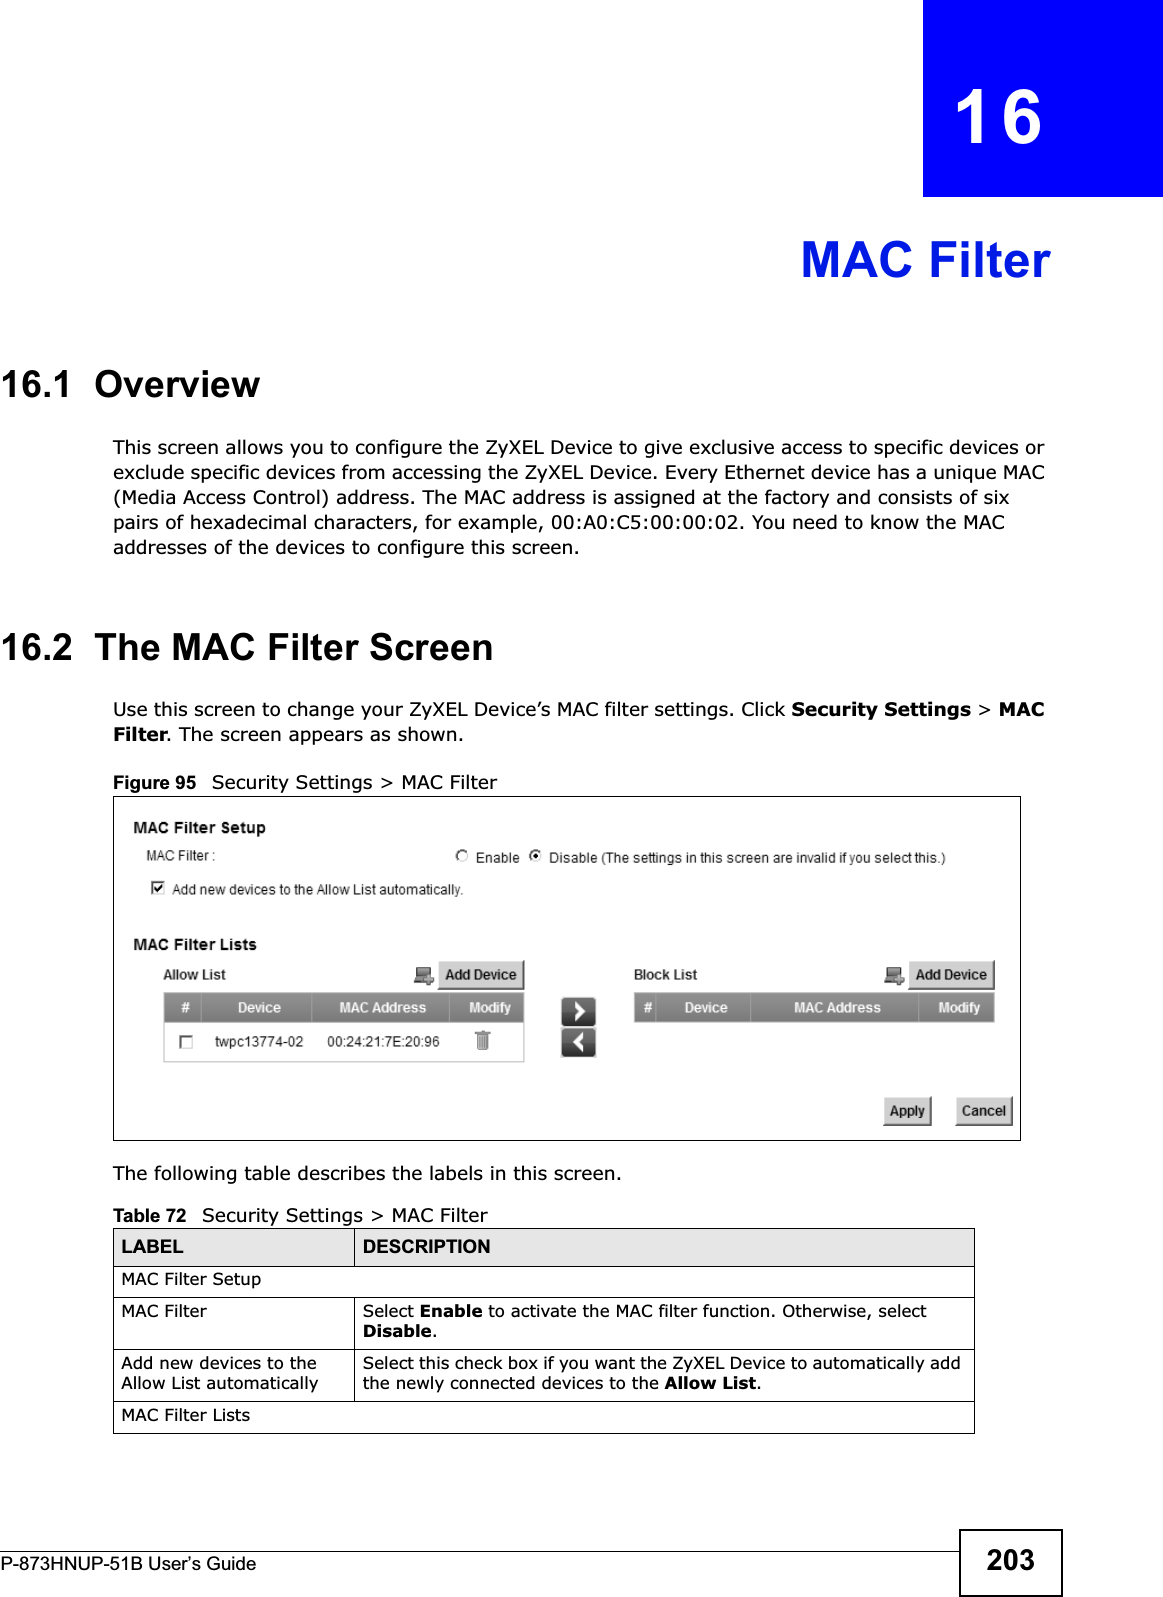 P-873HNUP-51B User’s Guide 203CHAPTER   16MAC Filter16.1  Overview This screen allows you to configure the ZyXEL Device to give exclusive access to specific devices or exclude specific devices from accessing the ZyXEL Device. Every Ethernet device has a unique MAC (Media Access Control) address. The MAC address is assigned at the factory and consists of six pairs of hexadecimal characters, for example, 00:A0:C5:00:00:02. You need to know the MAC addresses of the devices to configure this screen.16.2  The MAC Filter ScreenUse this screen to change your ZyXEL Device’s MAC filter settings. Click Security Settings &gt;MACFilter. The screen appears as shown.Figure 95   Security Settings &gt; MAC FilterThe following table describes the labels in this screen. Table 72   Security Settings &gt; MAC FilterLABEL DESCRIPTIONMAC Filter SetupMAC Filter  Select Enable to activate the MAC filter function. Otherwise, select Disable.Add new devices to the Allow List automaticallySelect this check box if you want the ZyXEL Device to automatically add the newly connected devices to the Allow List.MAC Filter Lists